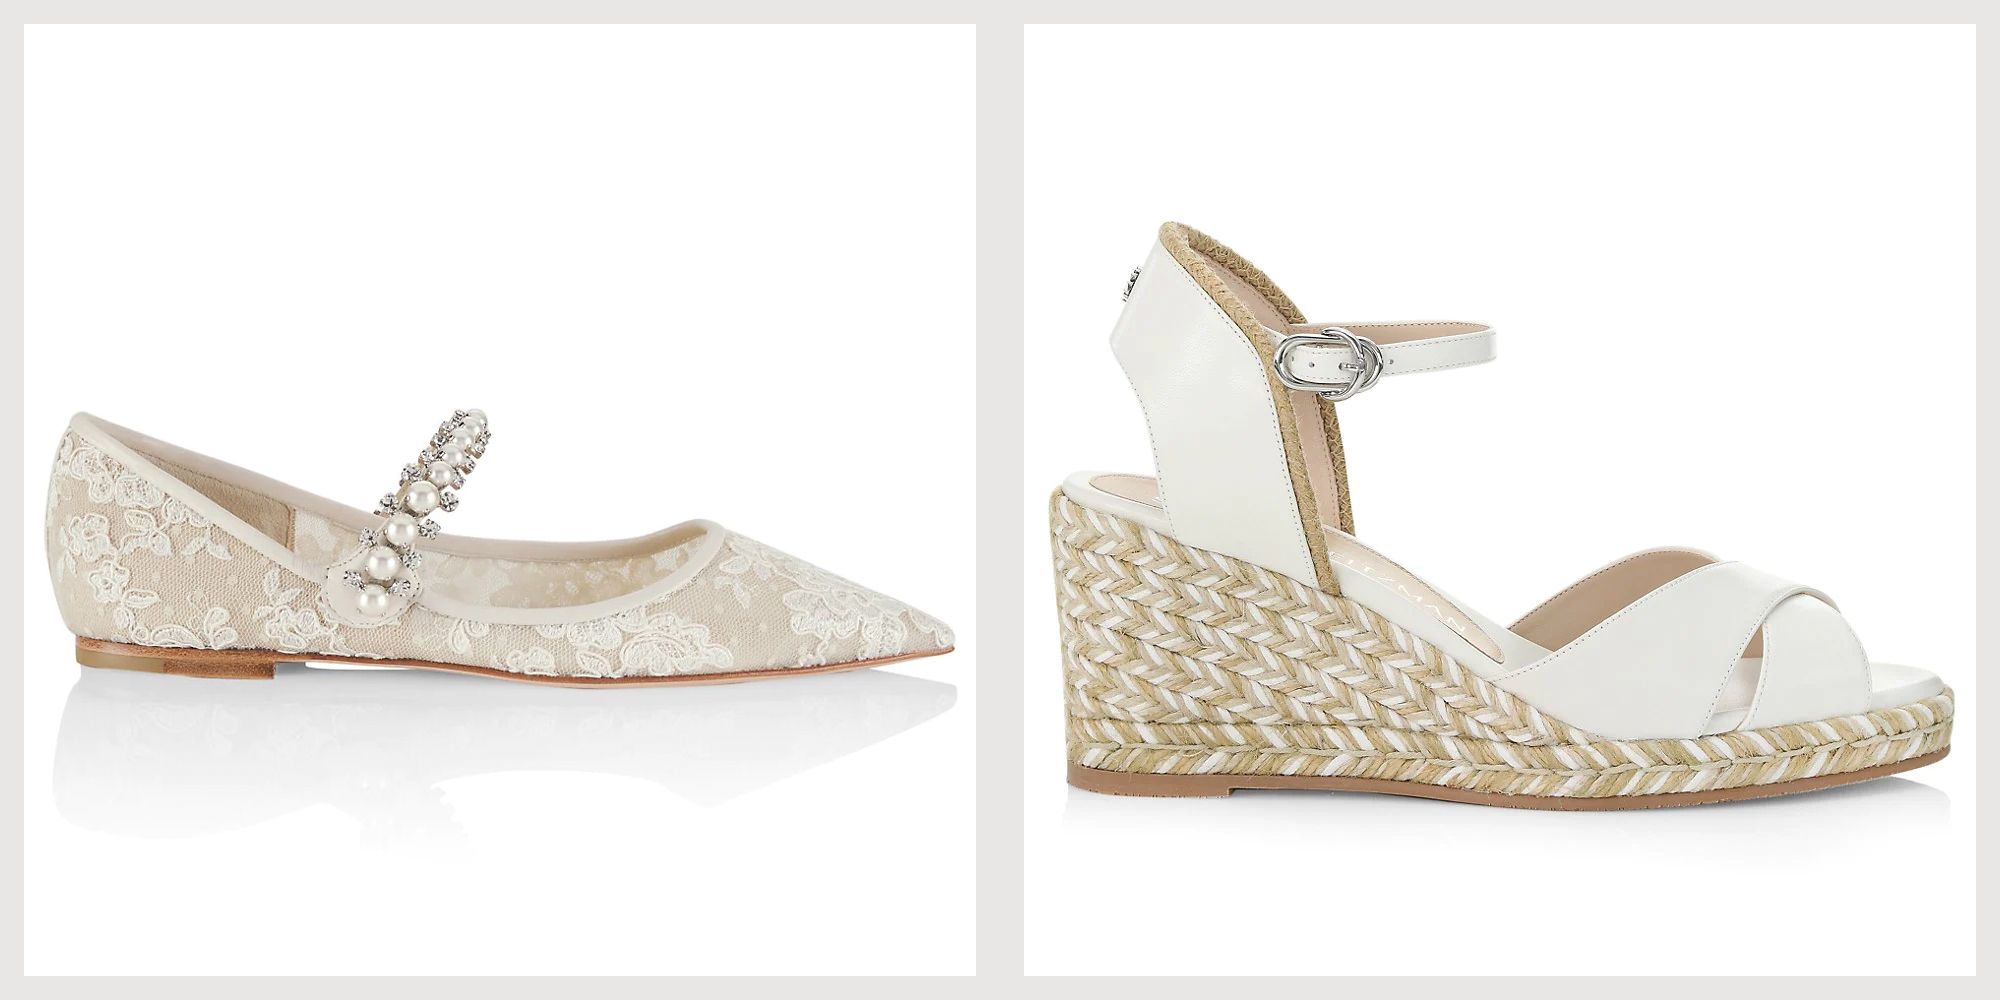 Shoes to Wear to an Outdoor Wedding 2023 - Wedding Flats to Wear This Season